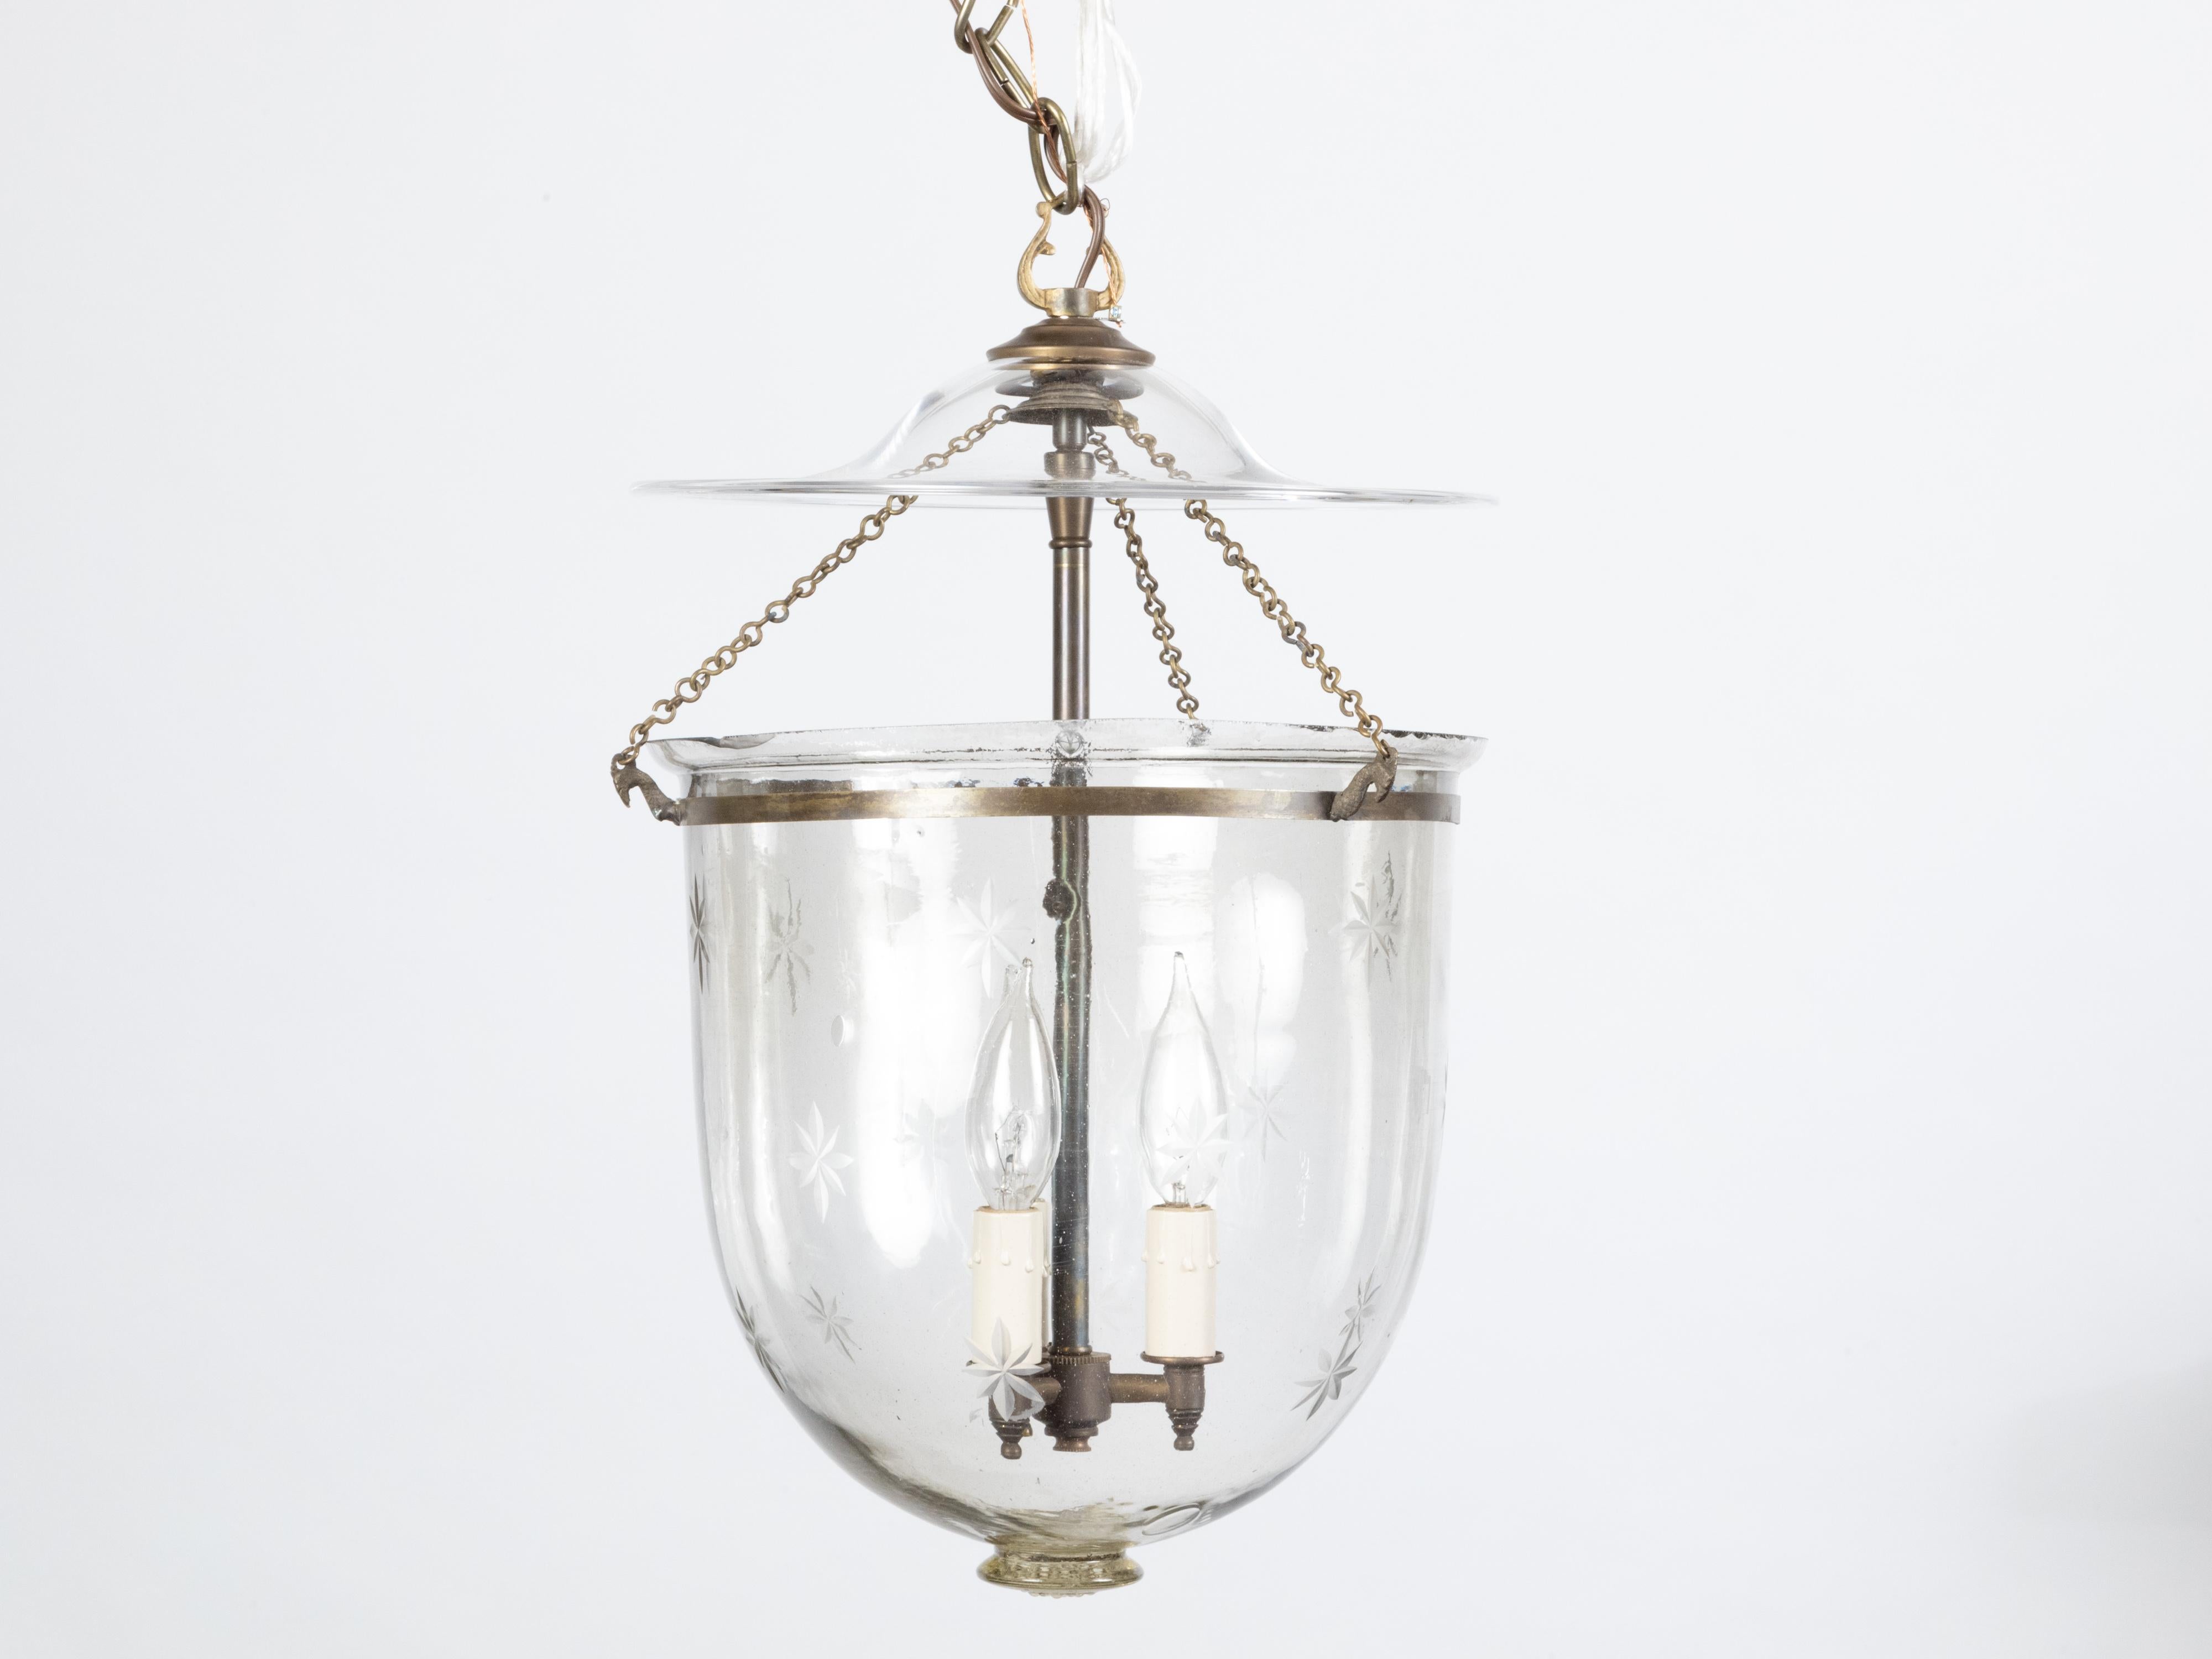 20th Century English 1900s Turn of the Century Bell Jar Light Fixture with Etched Stars For Sale